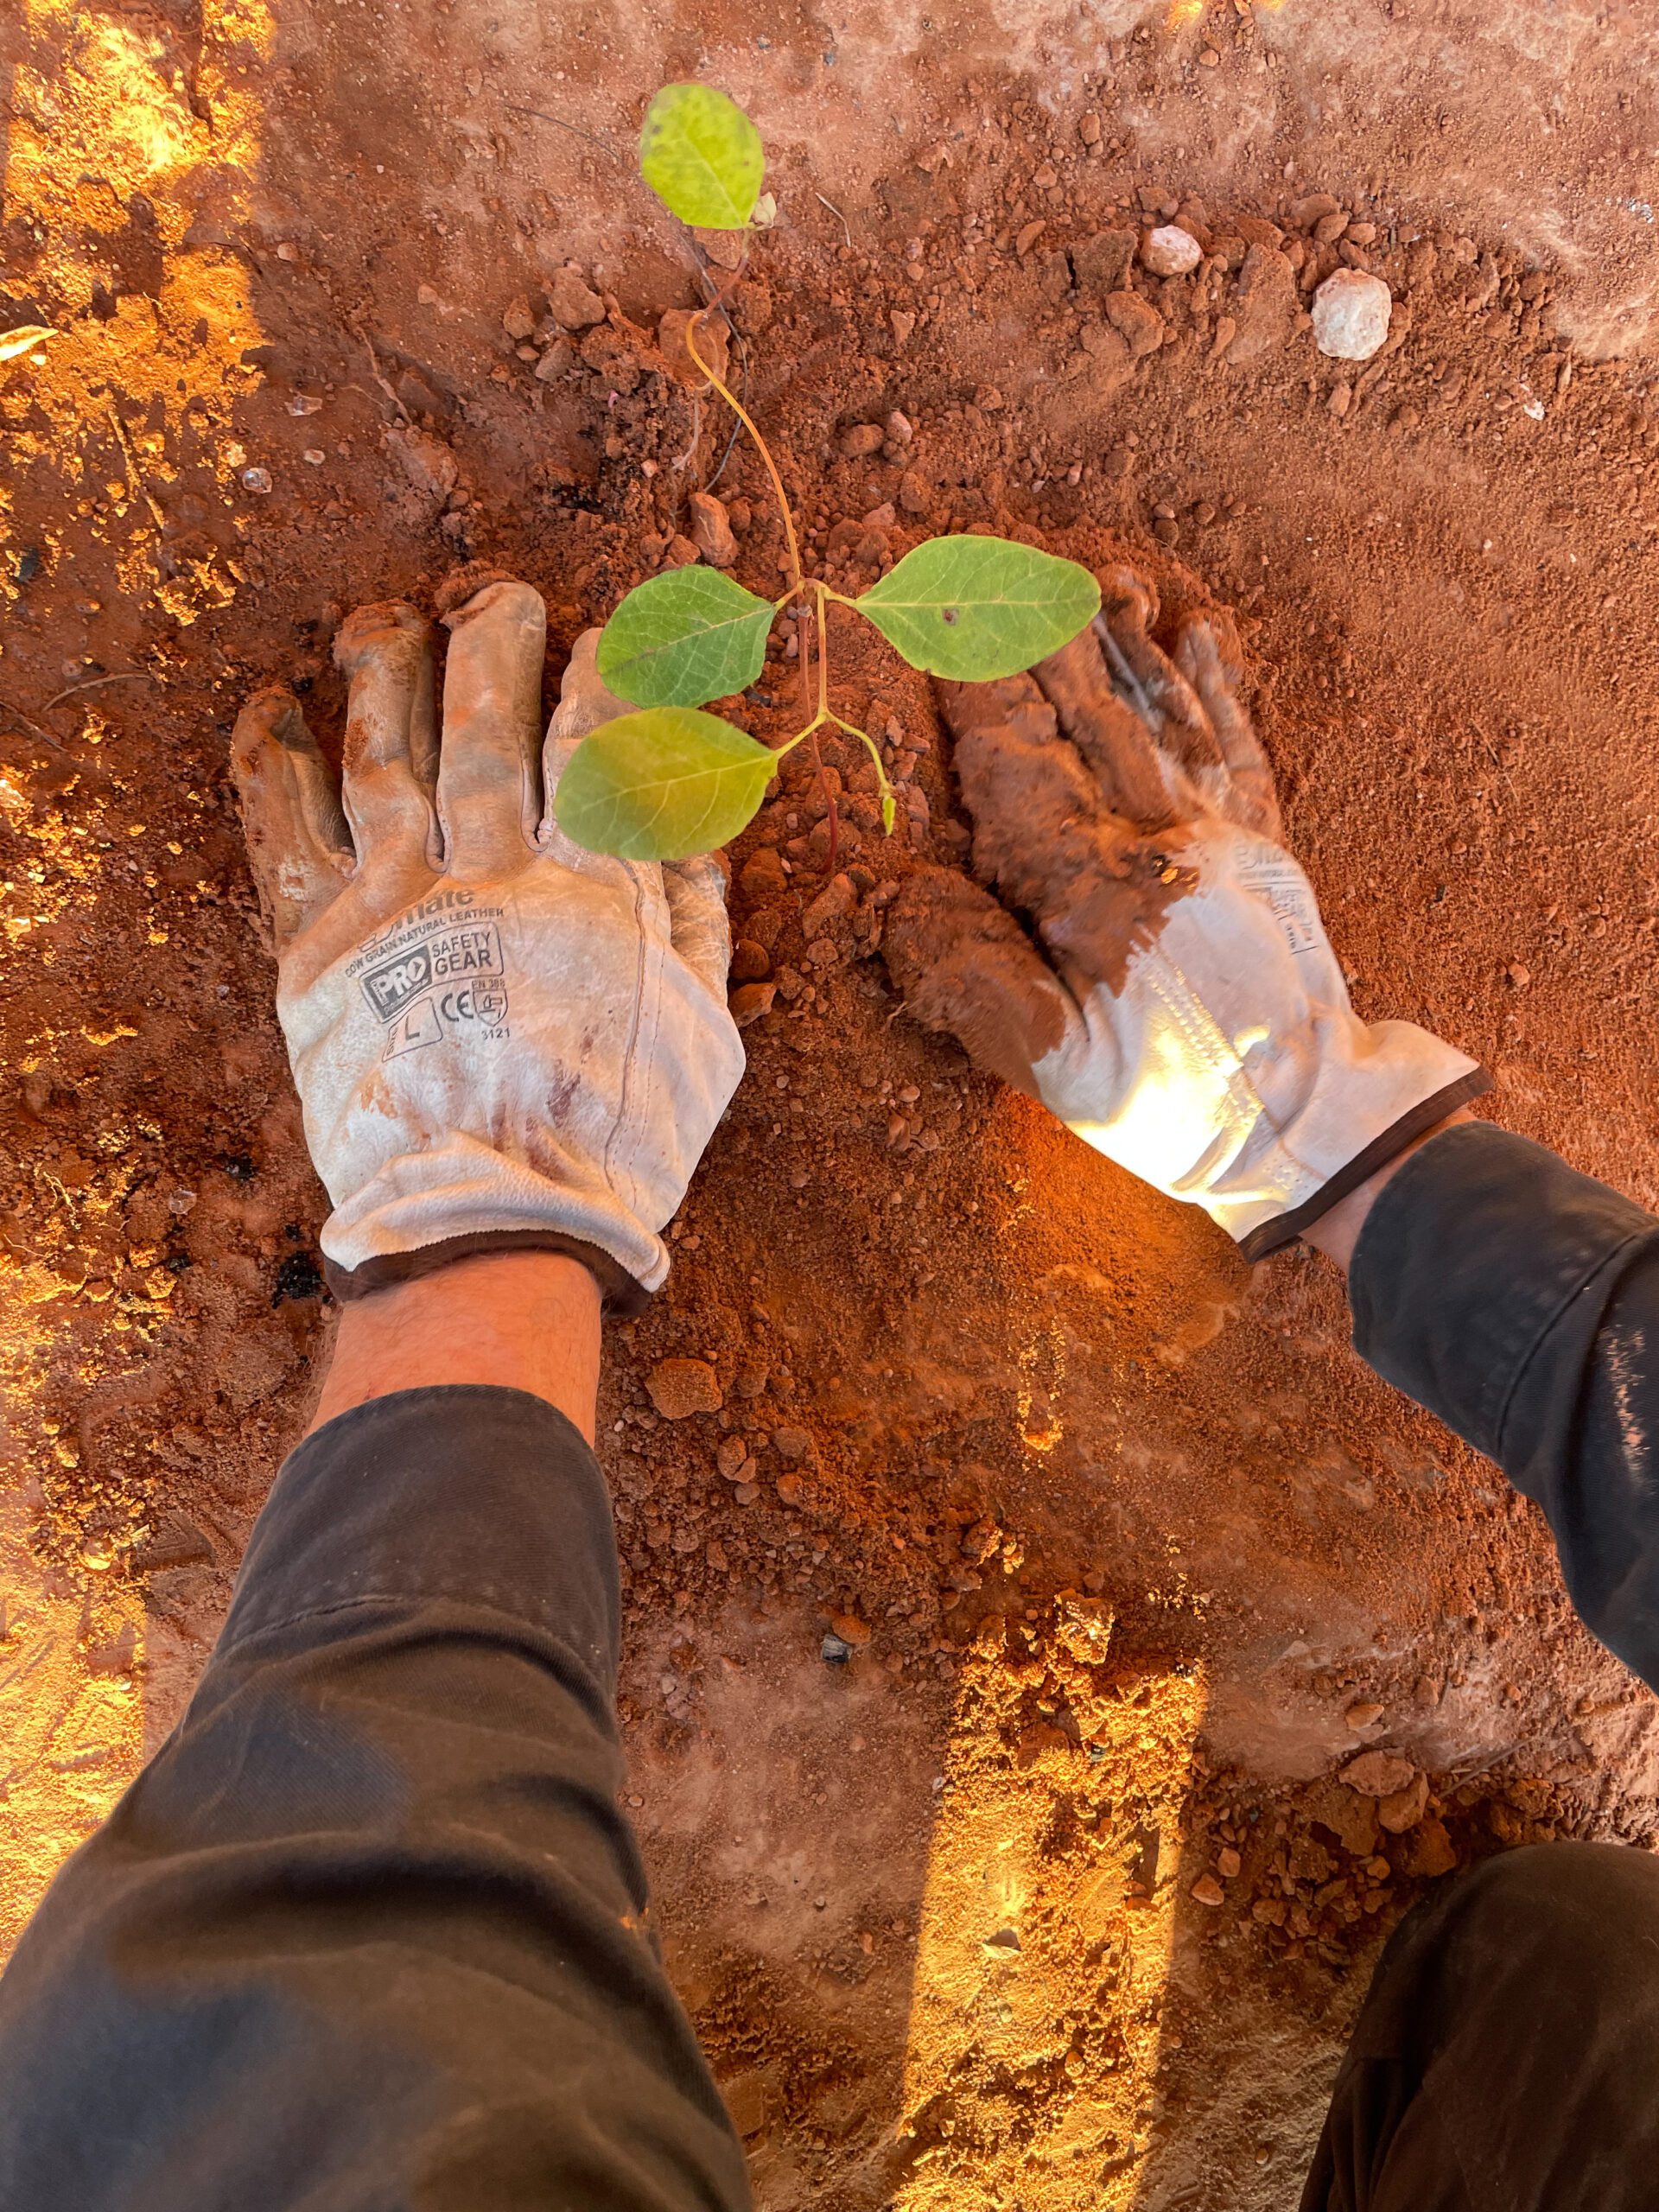 Two gloved hands around a planted green seedling